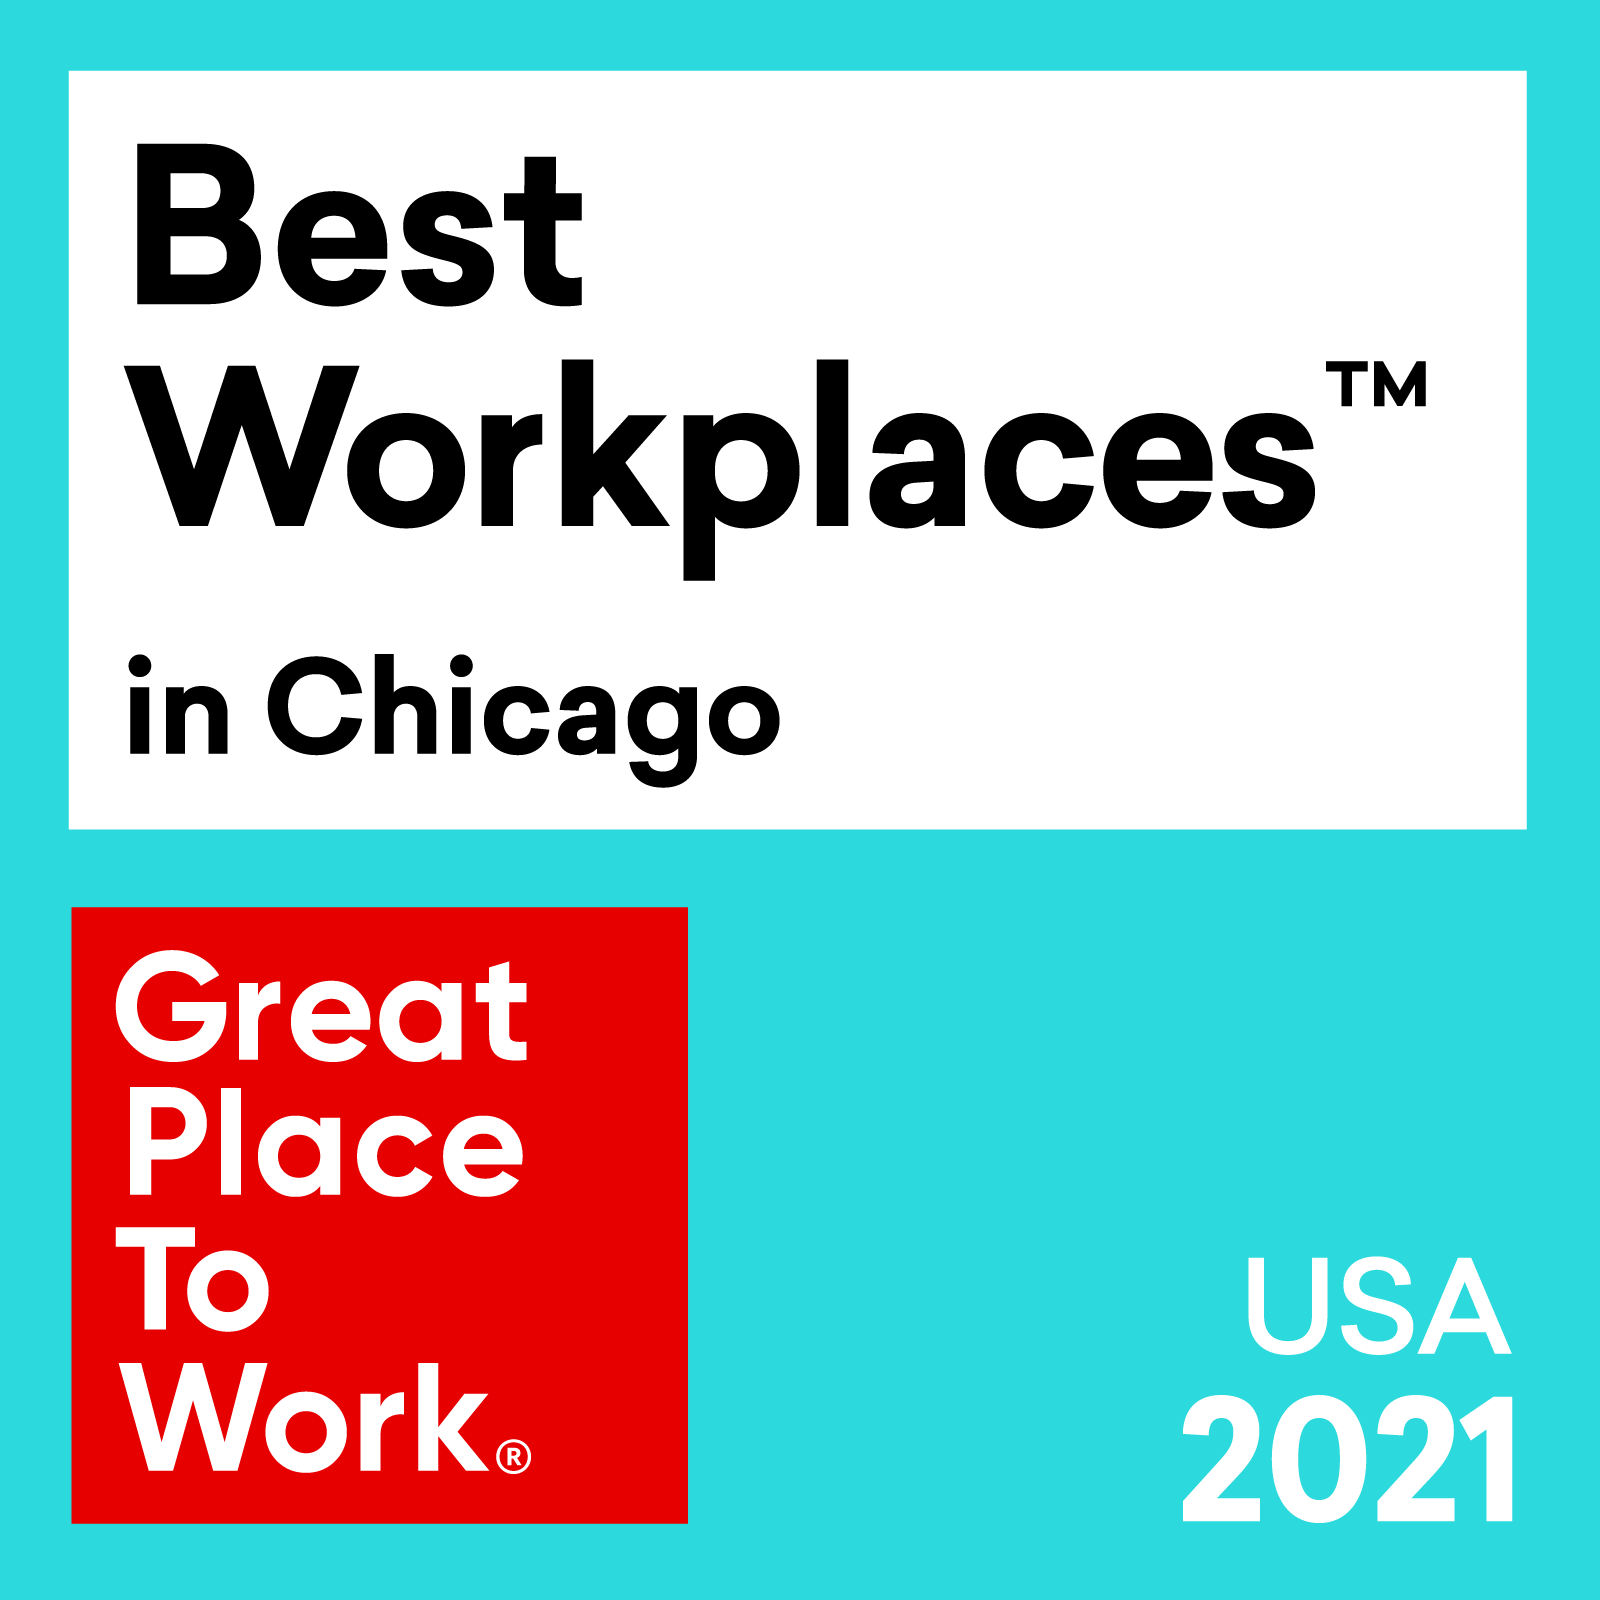 Best Workplaces™️ in Chicago - USA 2021 award from Great Place To Work